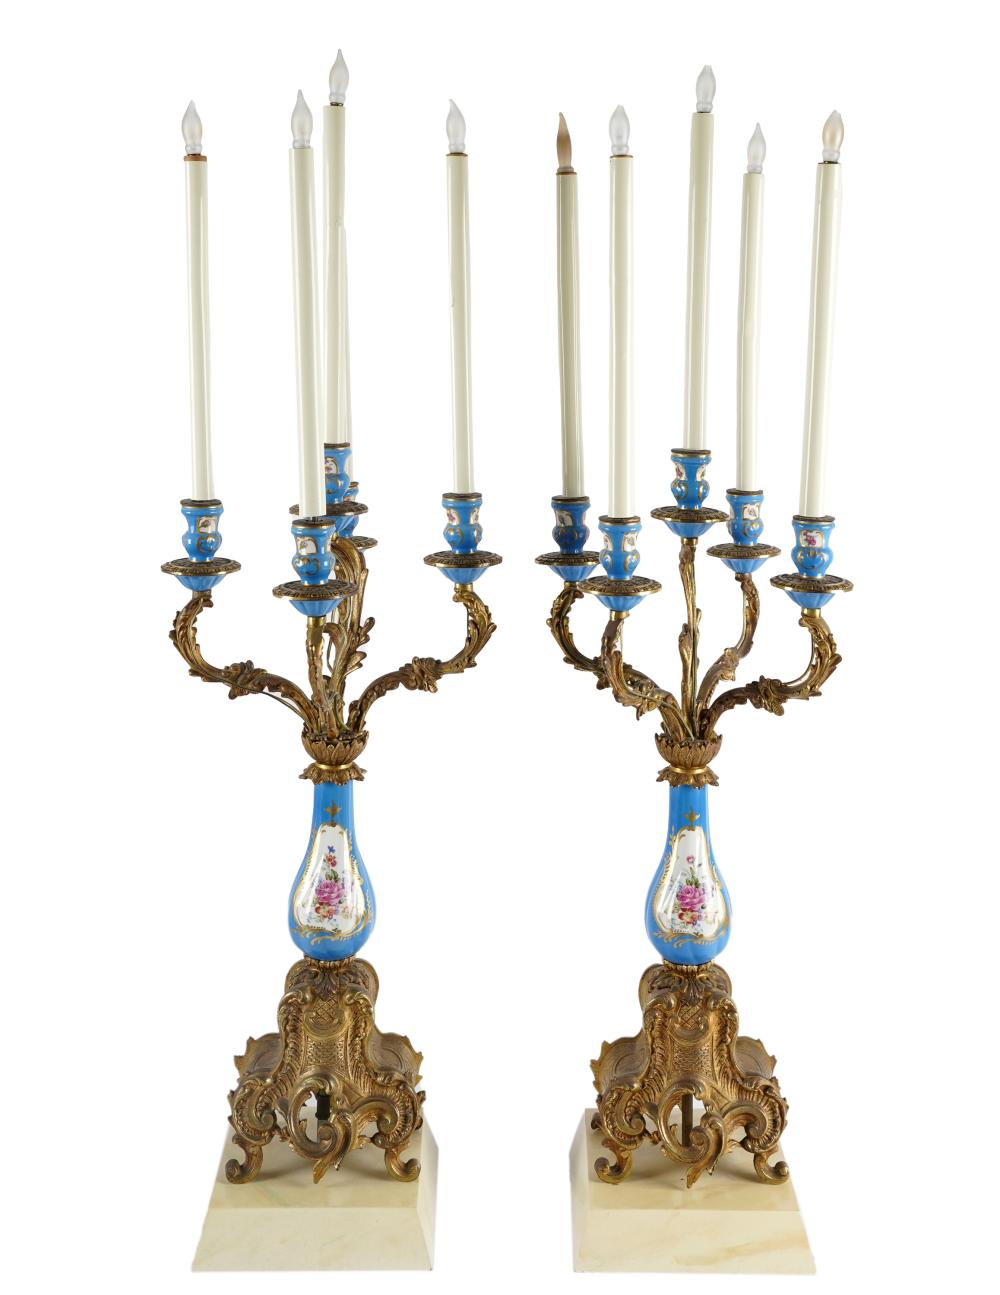 PAIR OF SEVRES-STYLE GILT METAL-MOUNTED